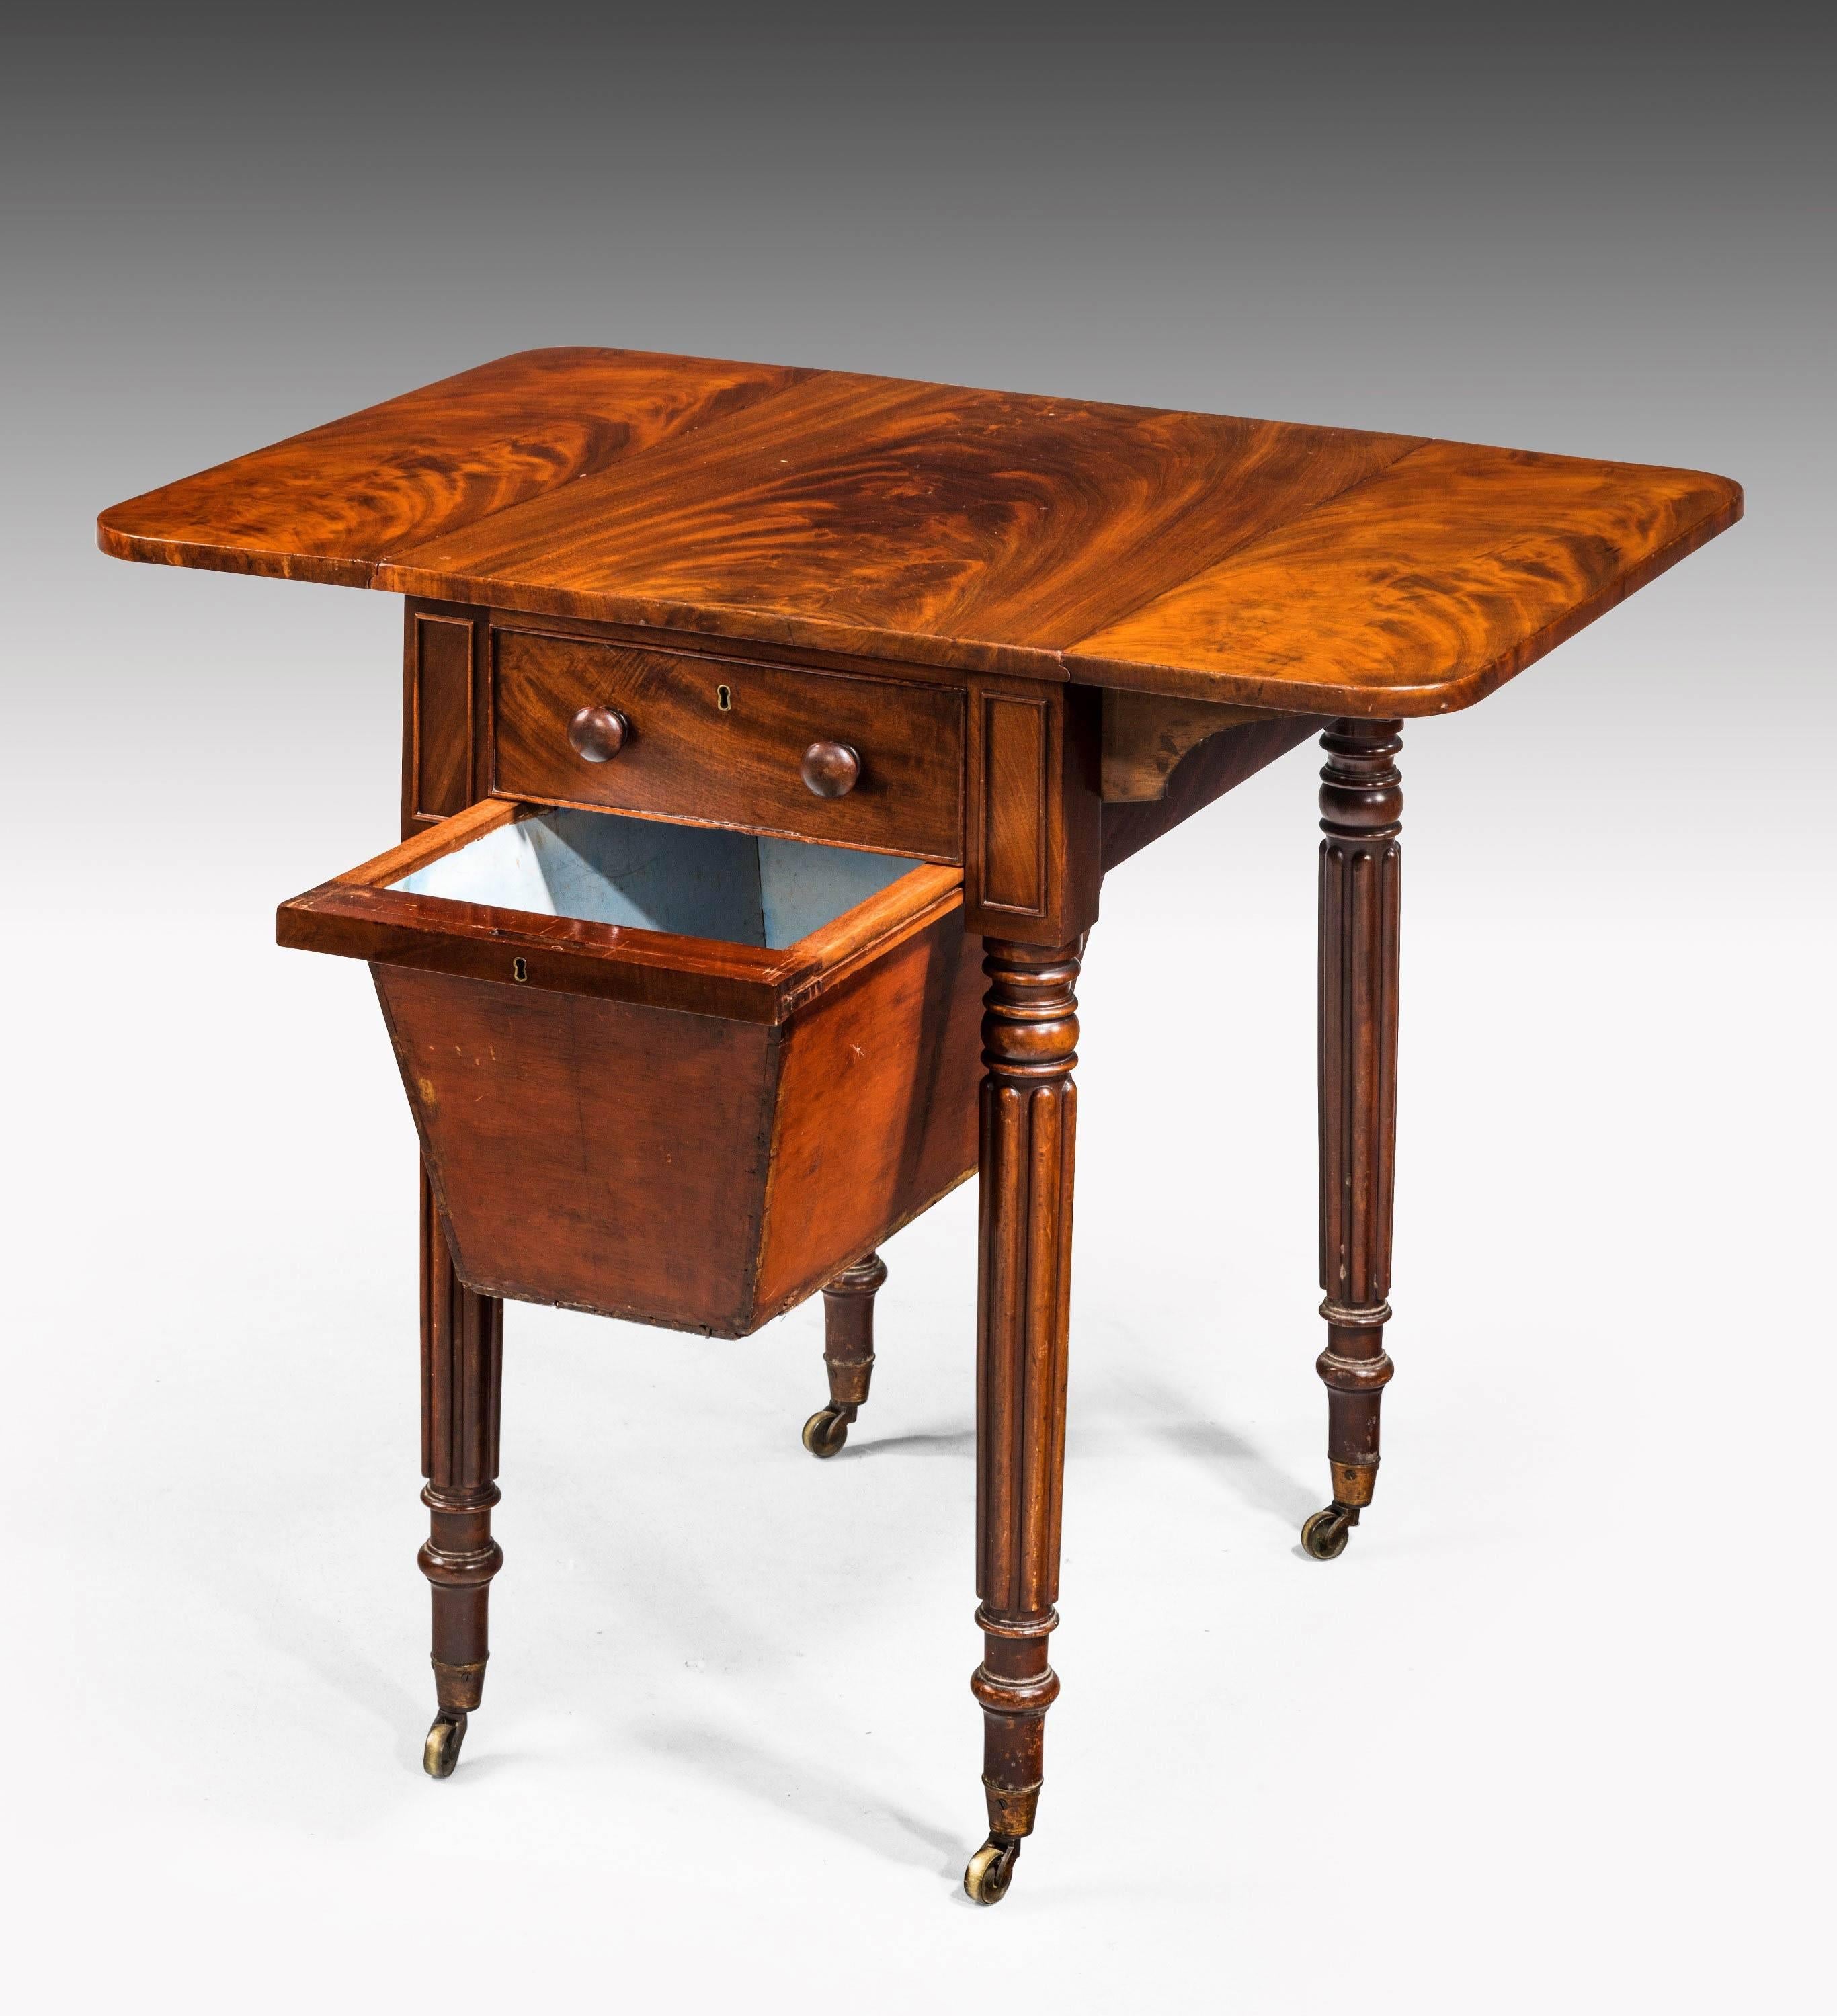 Late Regency period mahogany Pembroke work table. The beautifully figured timbers matching left and right hand to the top sections. A suspended sewing basket to the lower section between the well turned and reeded supports. Original shoes and